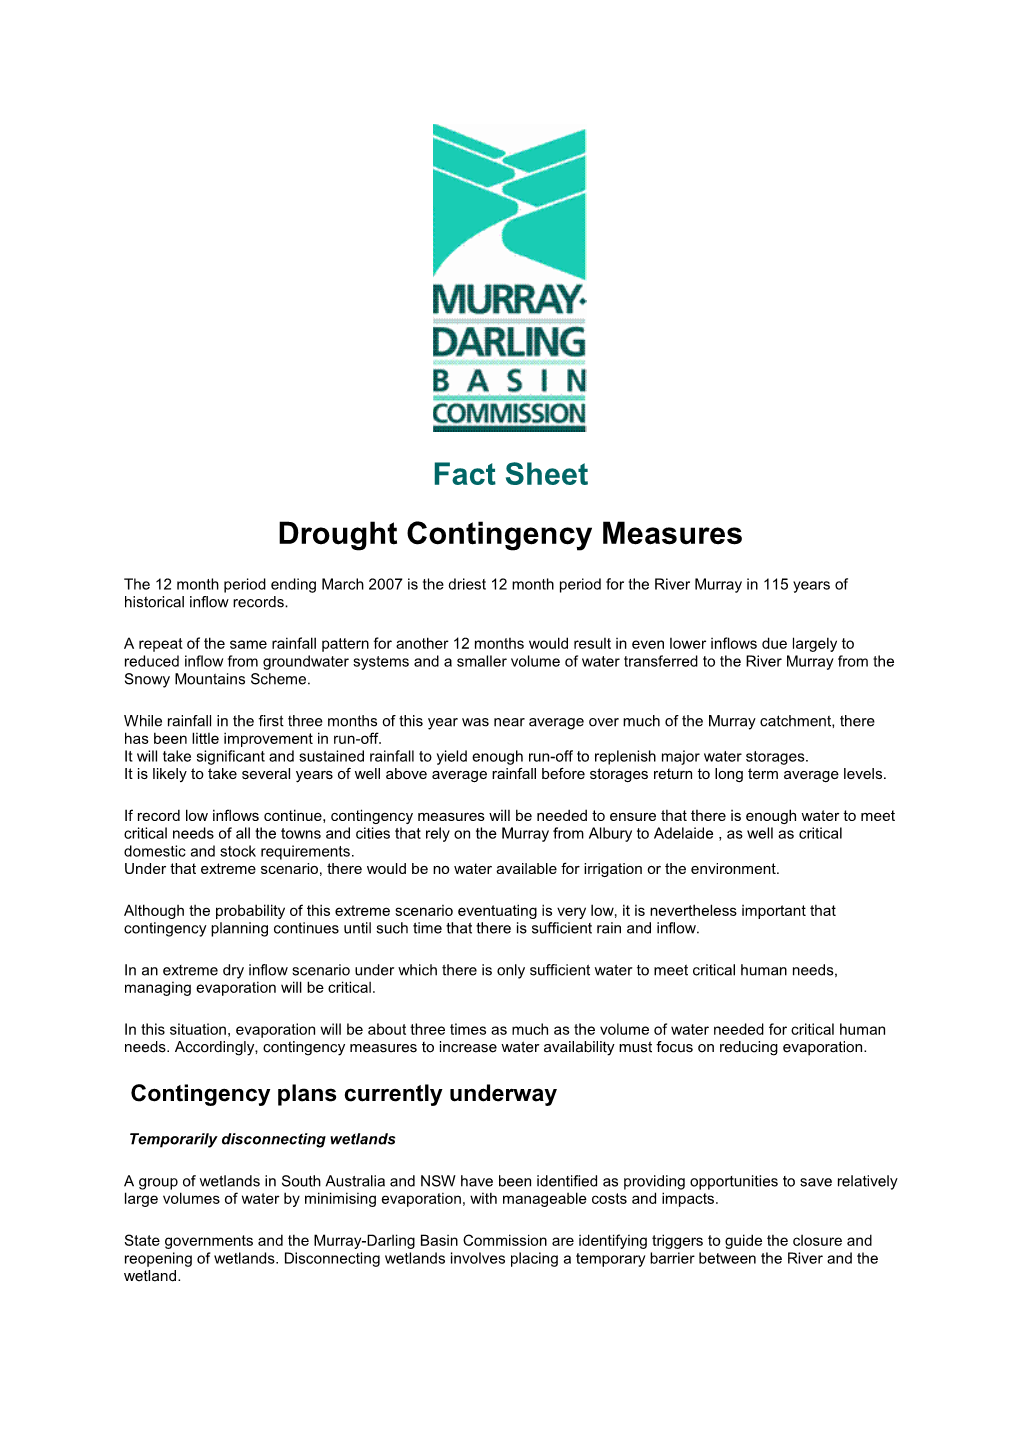 Drought Contingency Measures